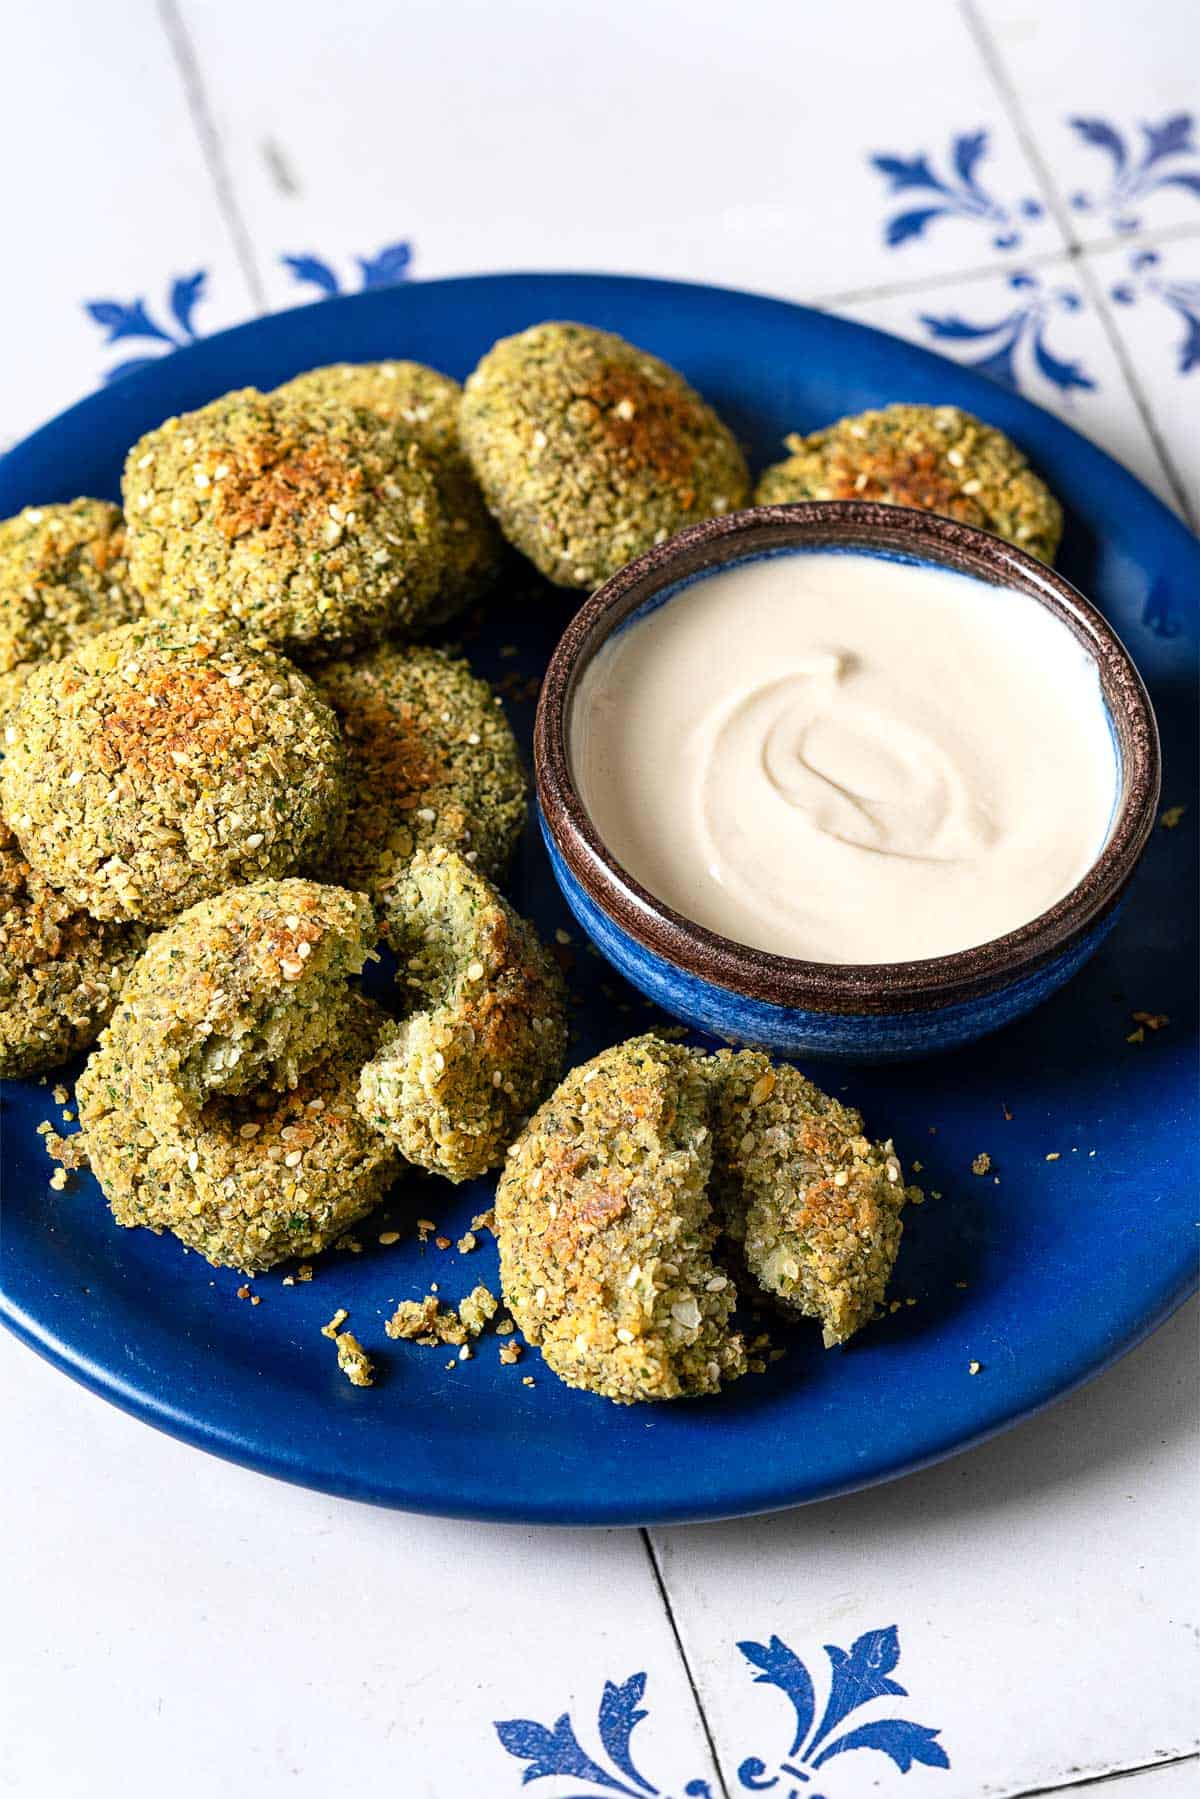 a plate of baked falafel with a small bowl of tahini sauce.